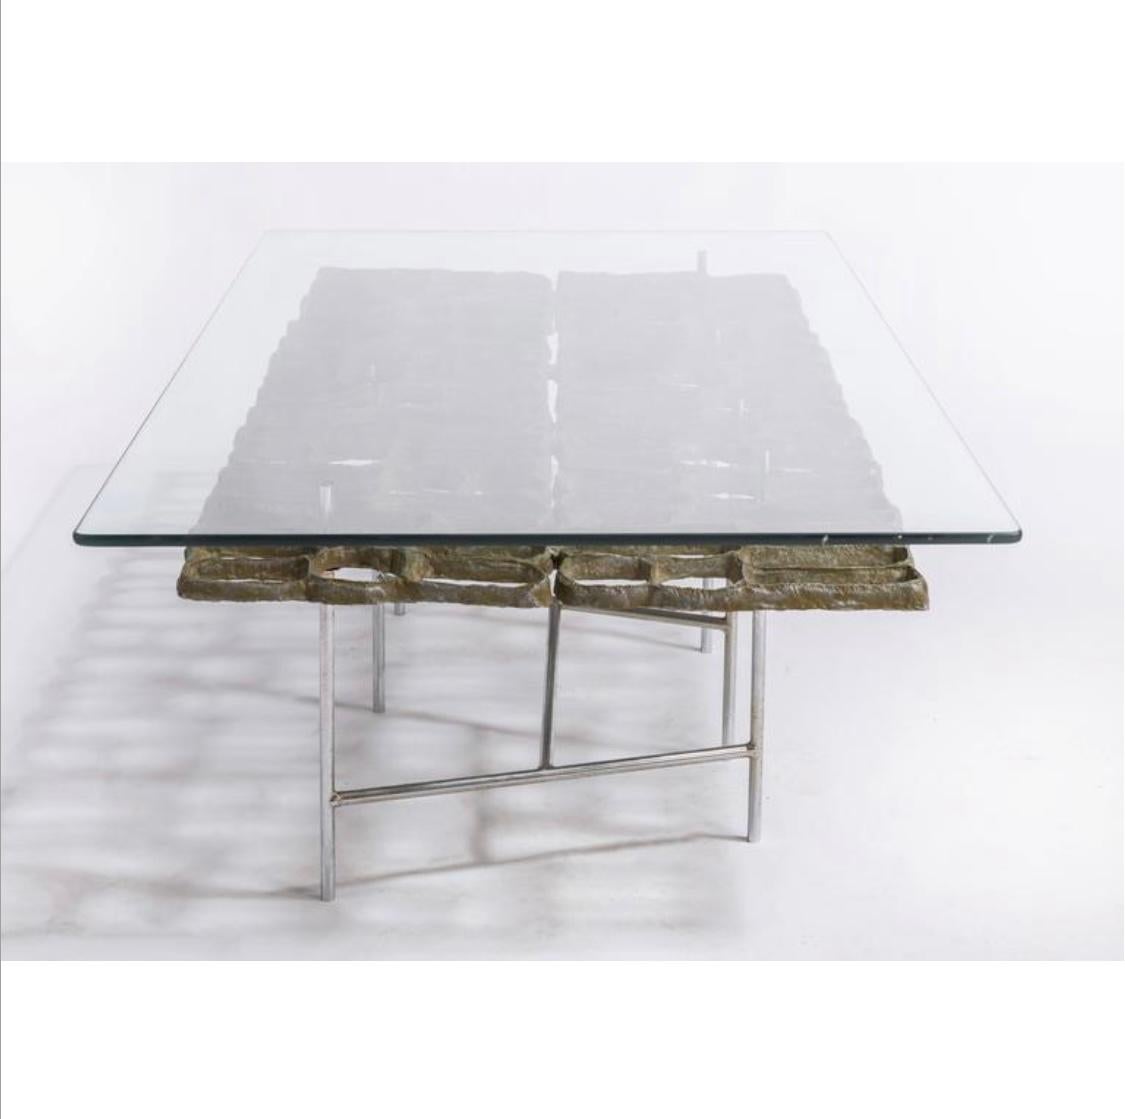 American Donald Drumm Coffee Table...Brutalist sculptural aluminum / glass / chrome For Sale